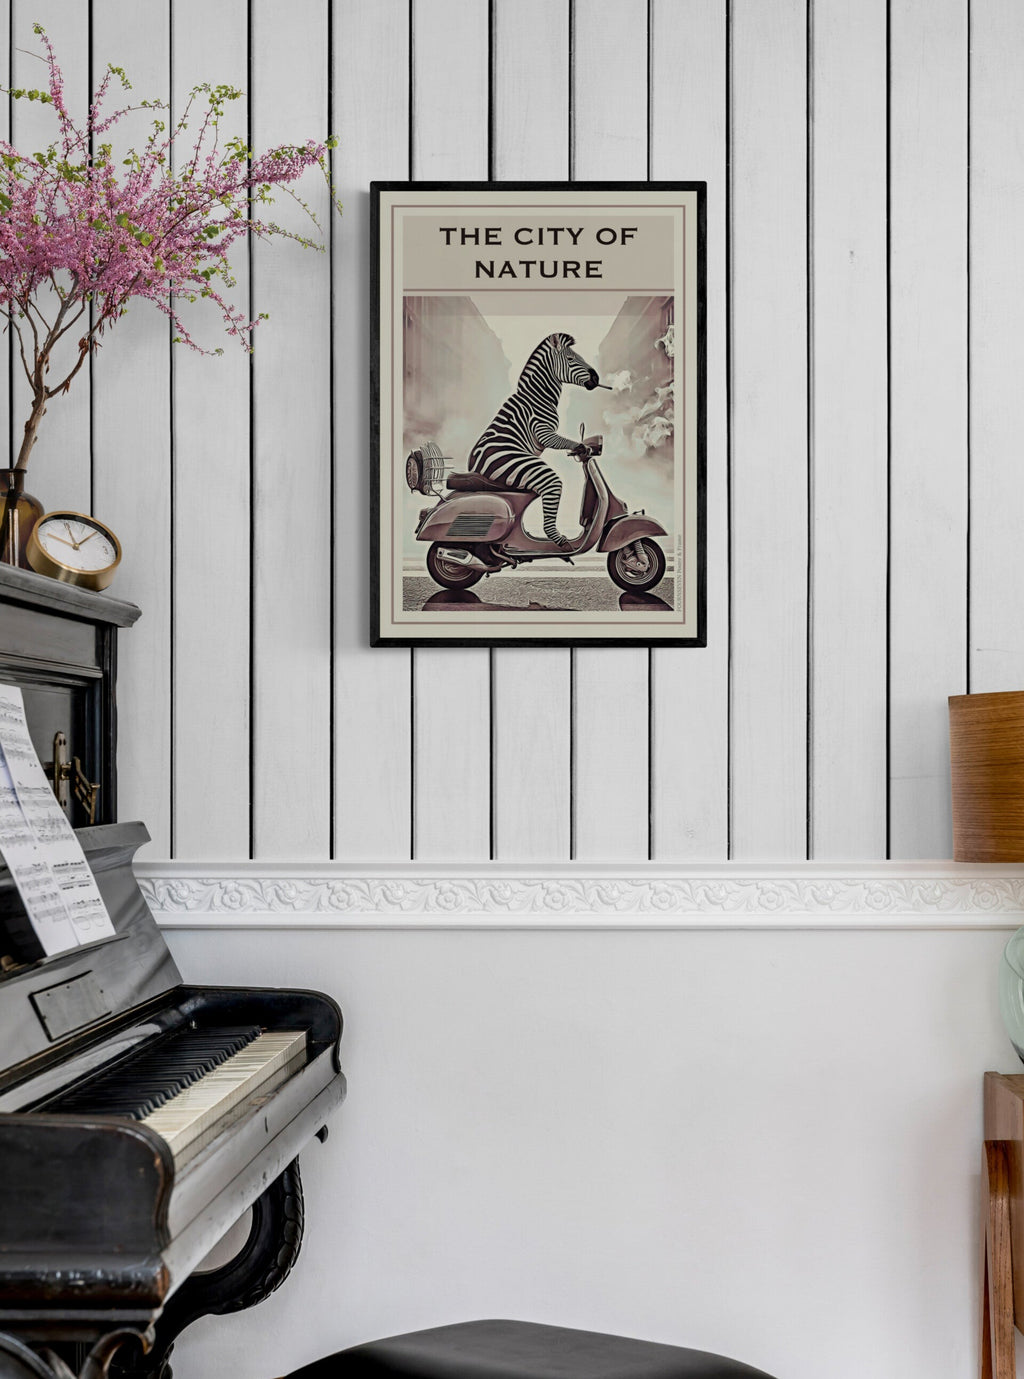 The City of Nature. Scooter riding Zebr poster.